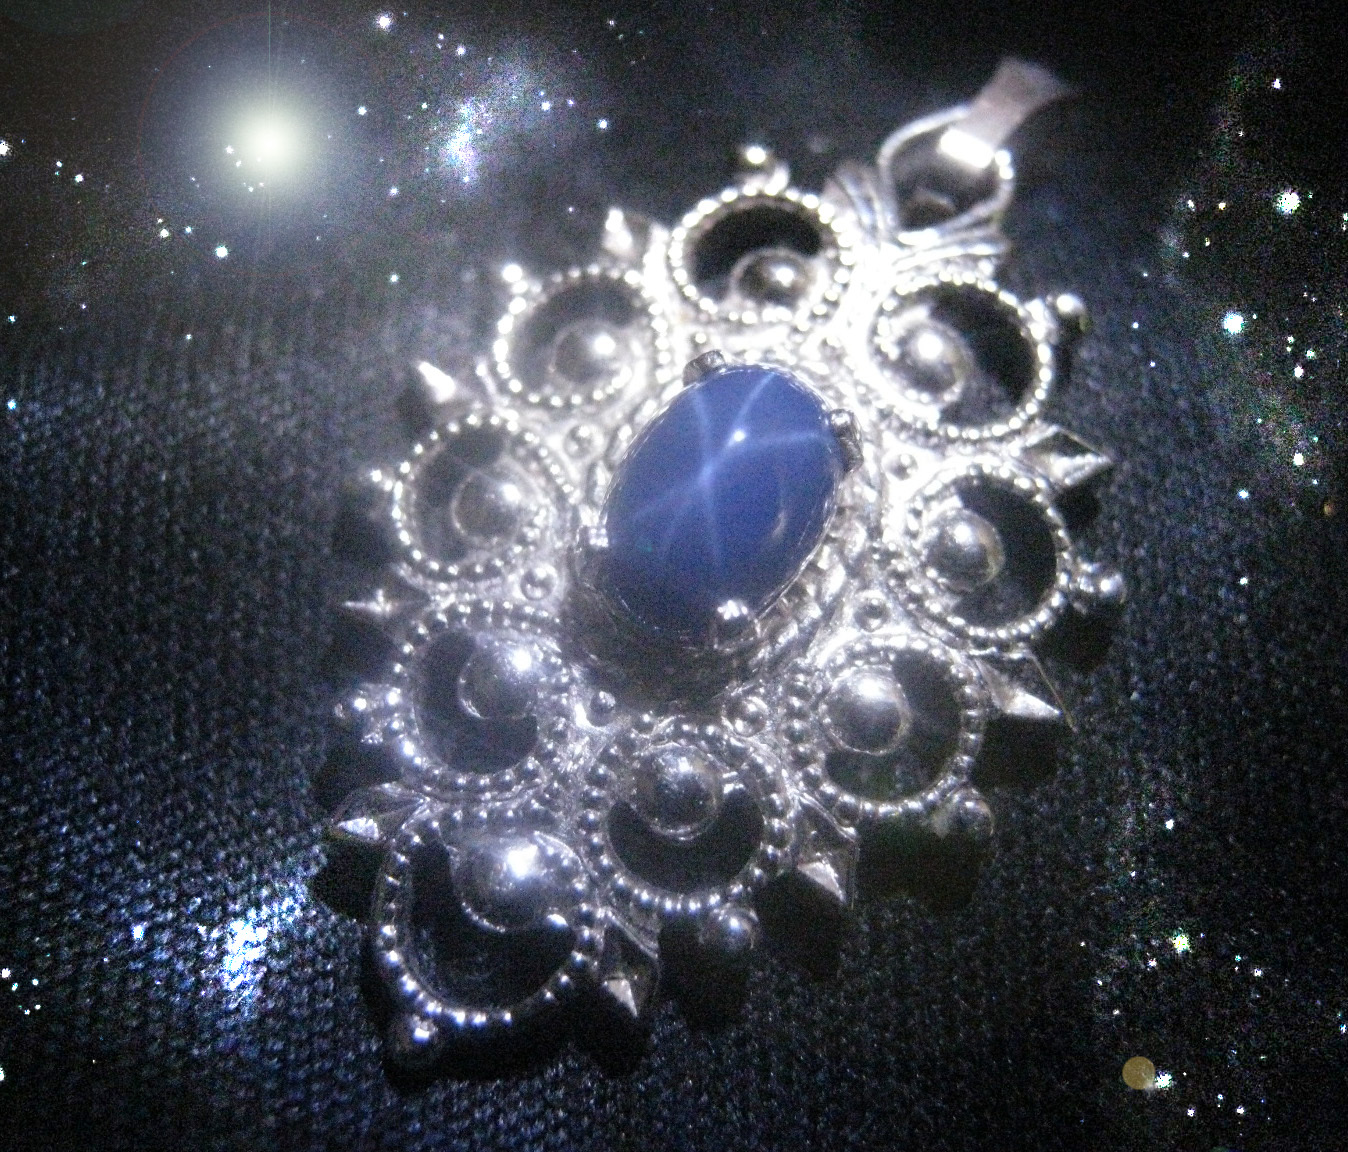 HAUNTED NECKLACE THE STAR MASTER MOST EXTREME MASTER POWERS RARE OOAK MAGICK  - $9,797.77